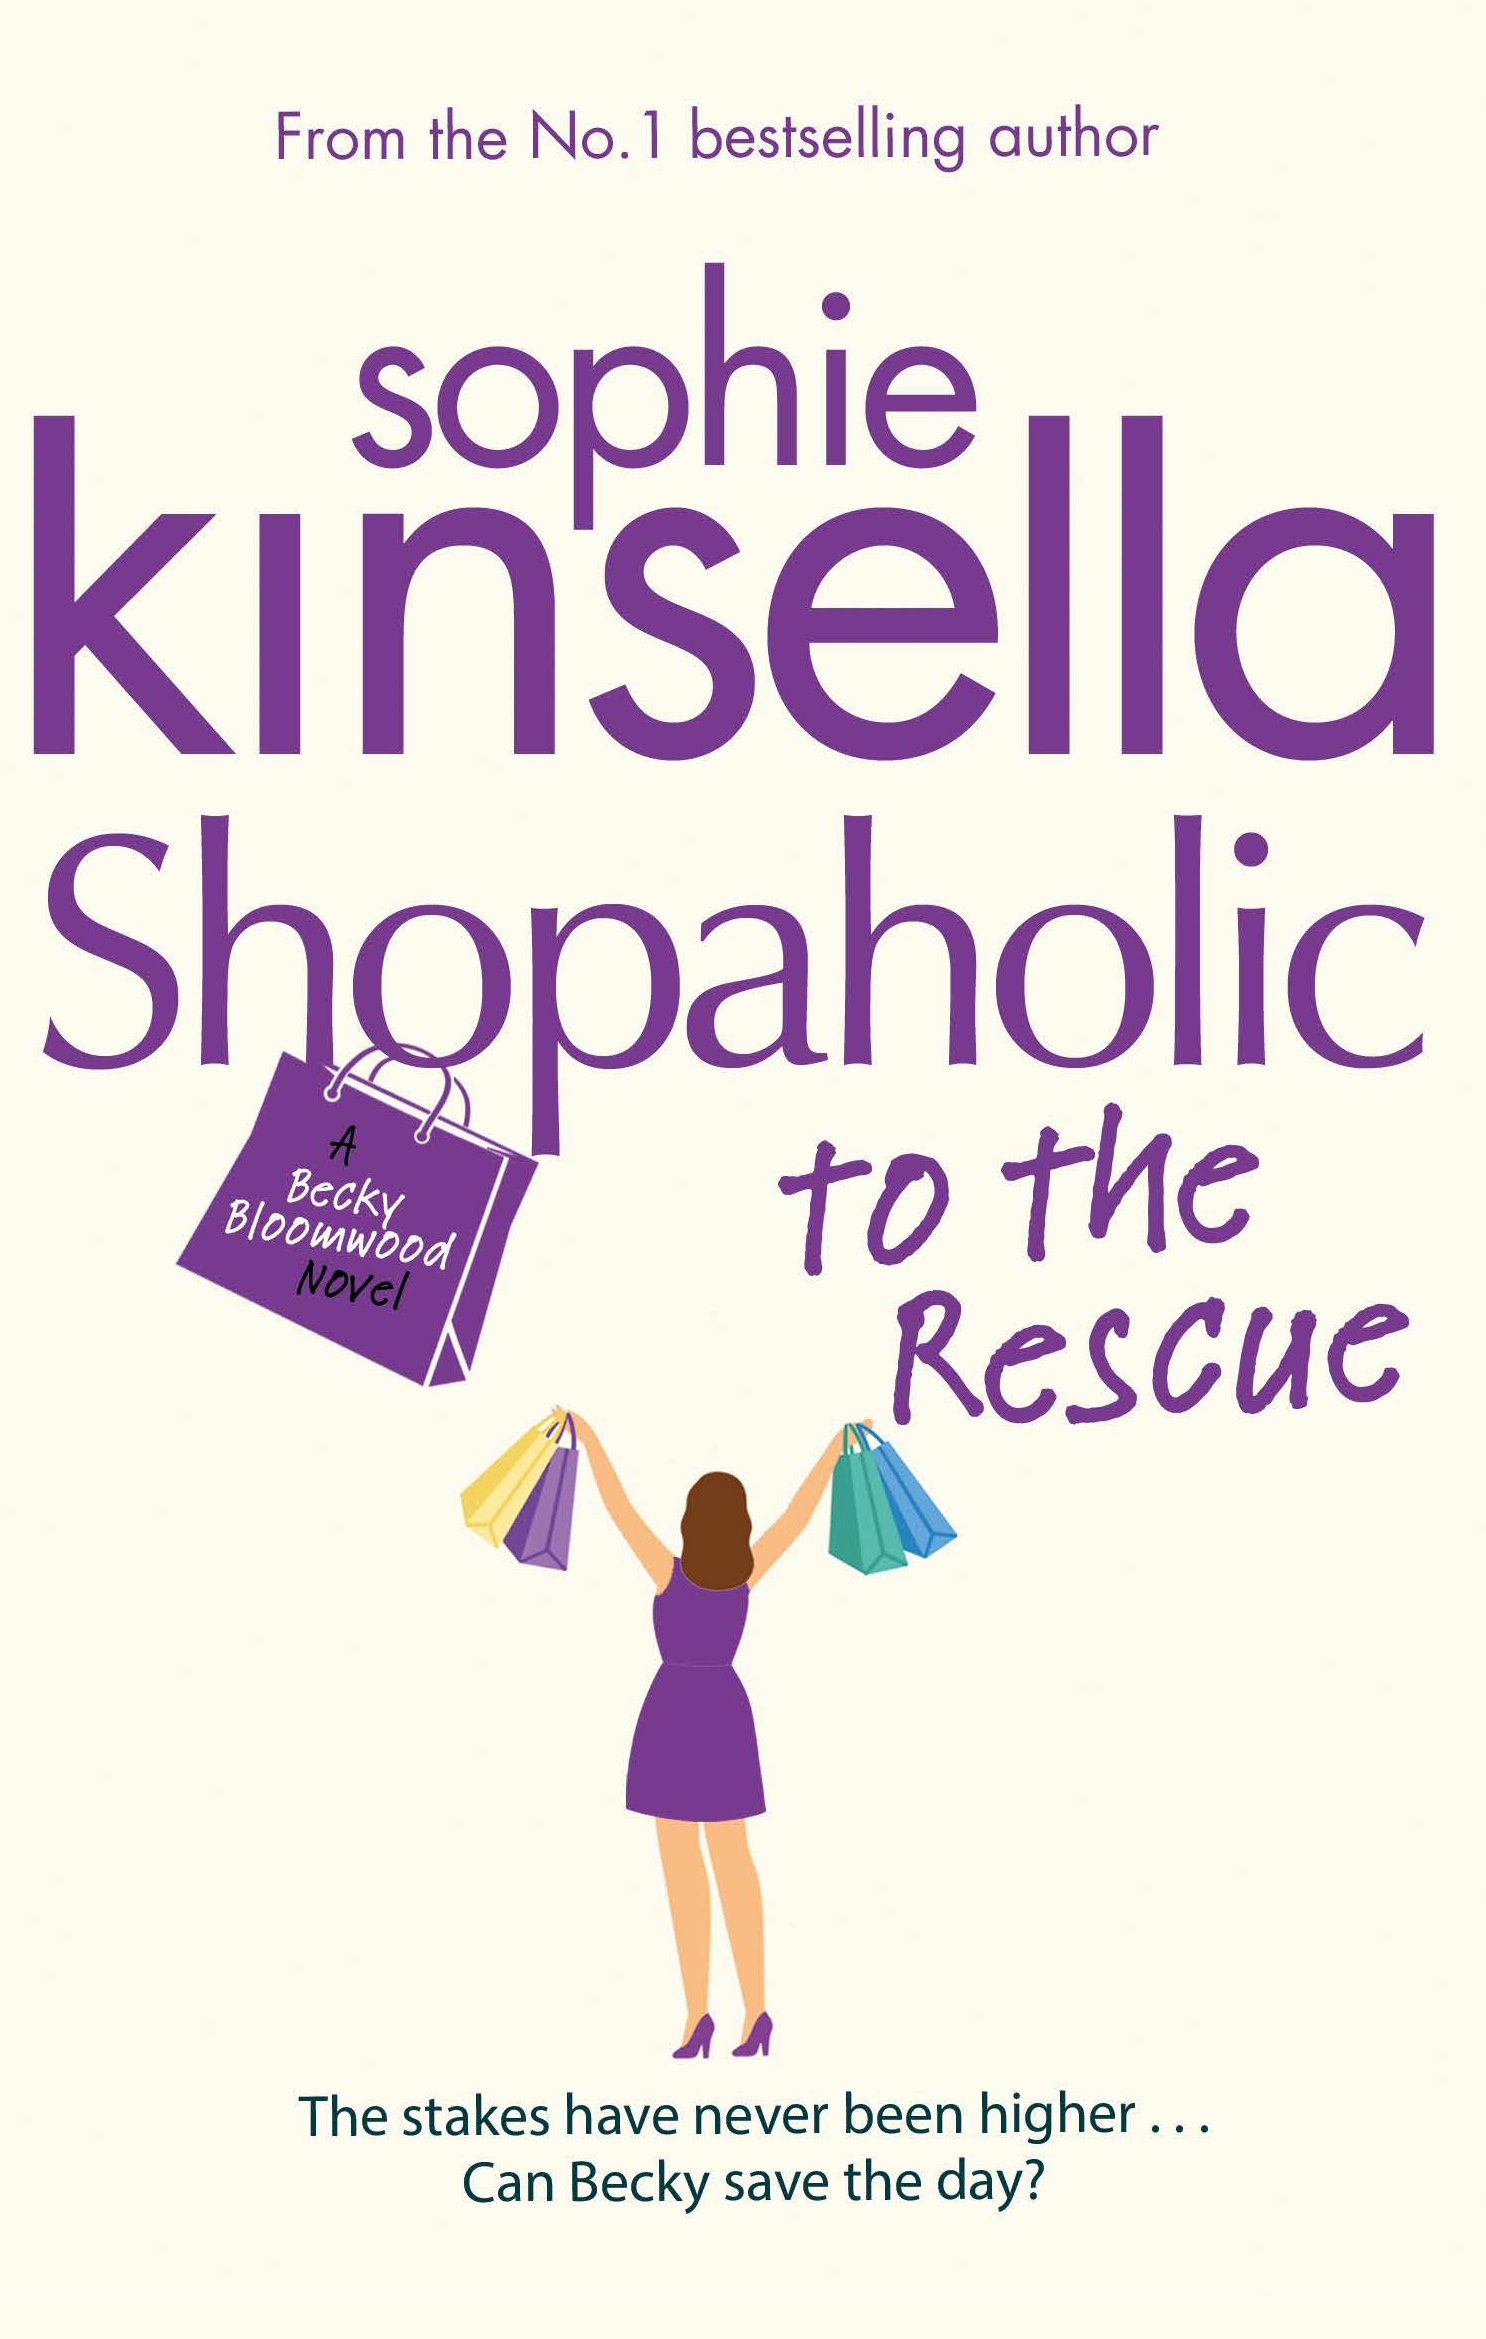 8. Shopaholic To The Rescue